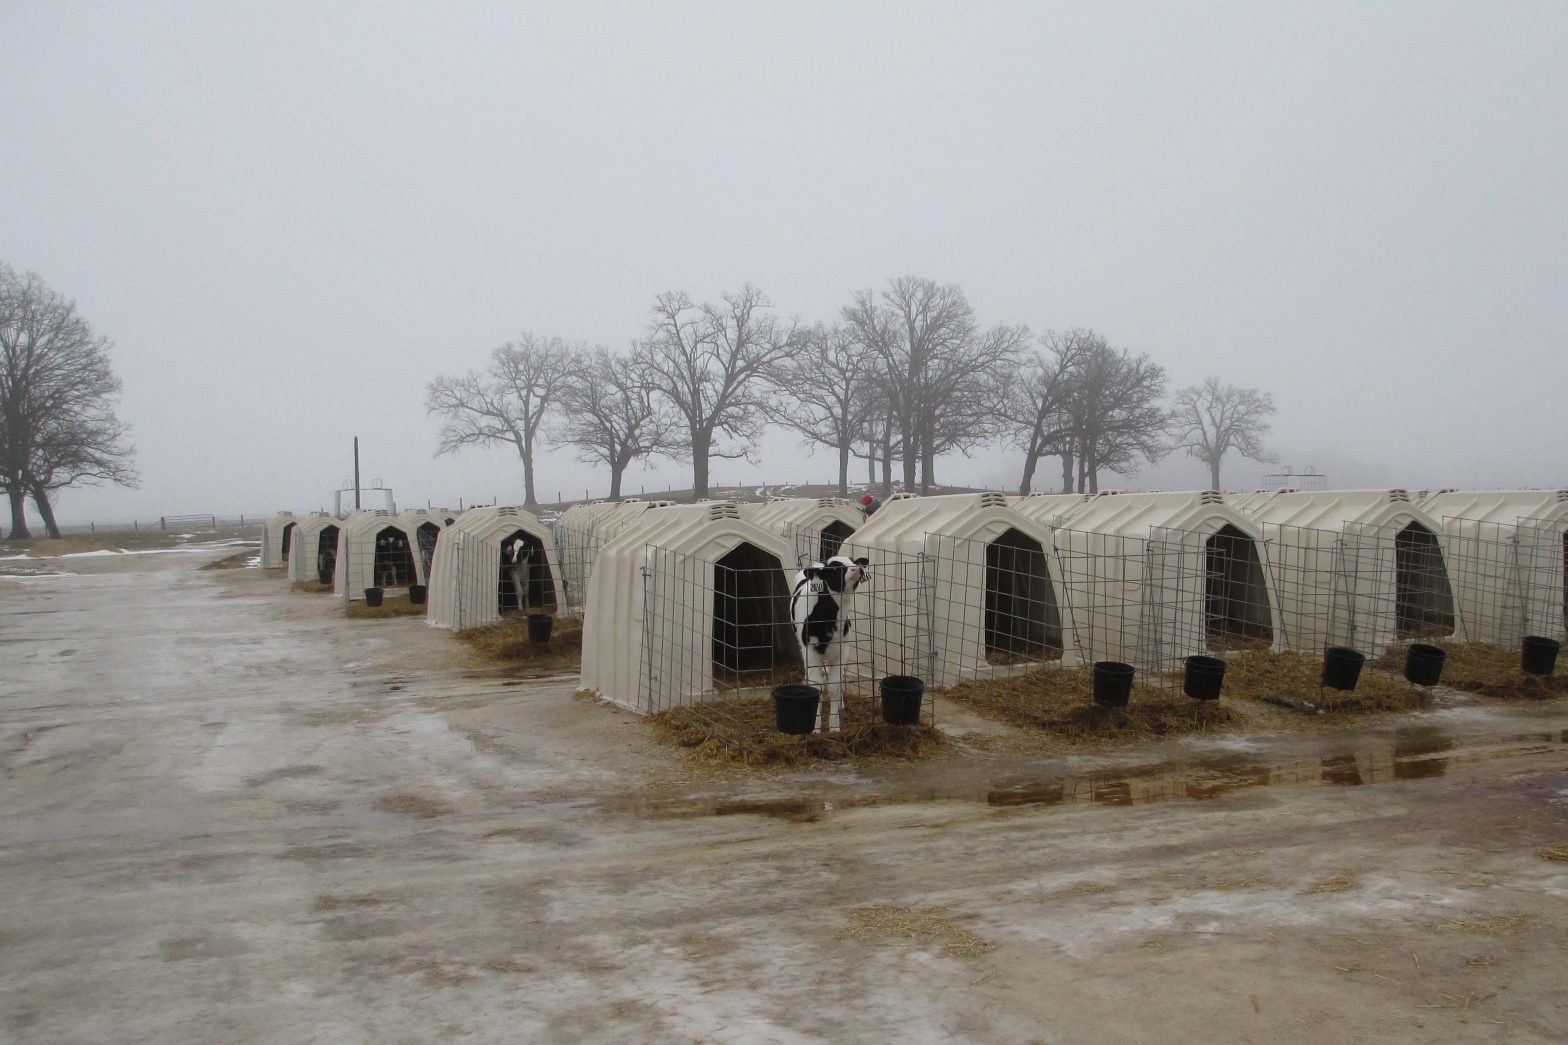 Up to 216 calves call these hutches home at Nehls Bros. Farms in Juneau, Wisconsin.  The dairy milks about 2,000 cows and manages animals at several sites within a mile radius.